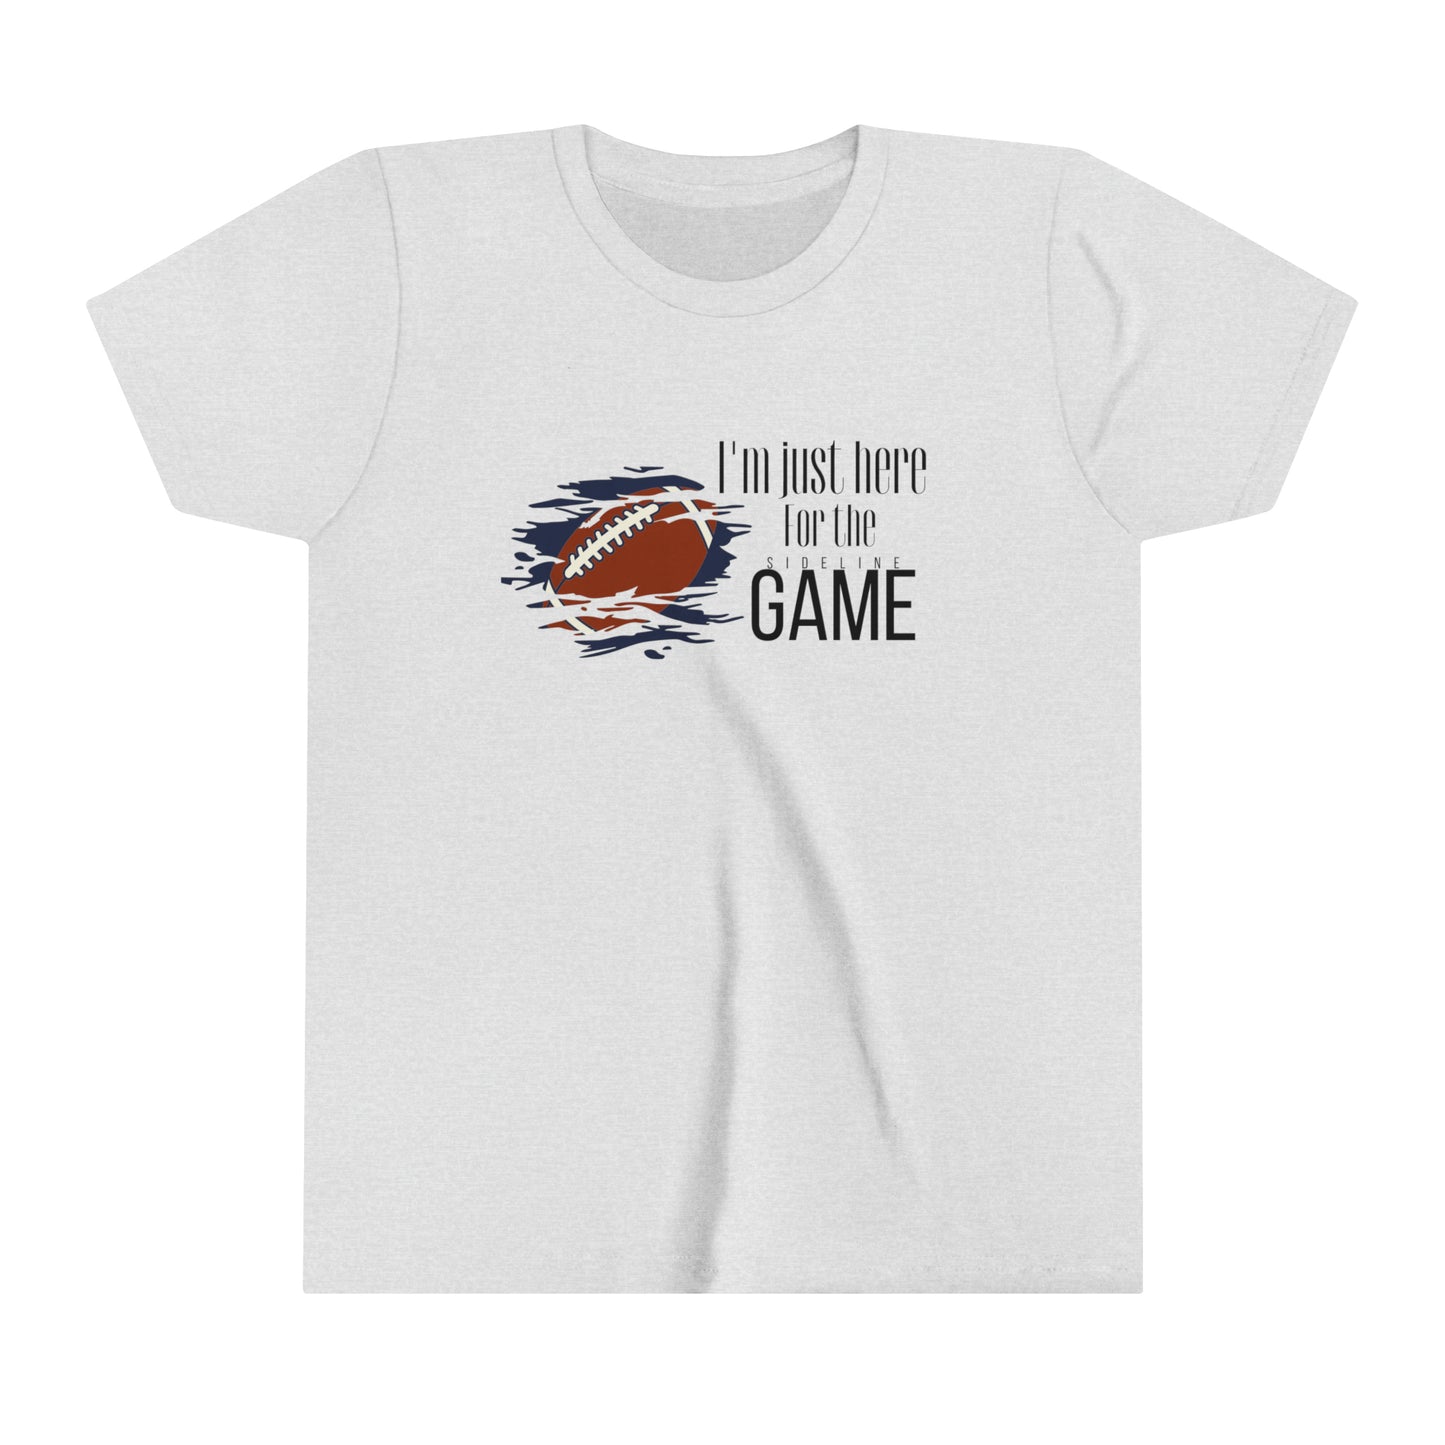 I'm just here for the sideline game kids t shirt